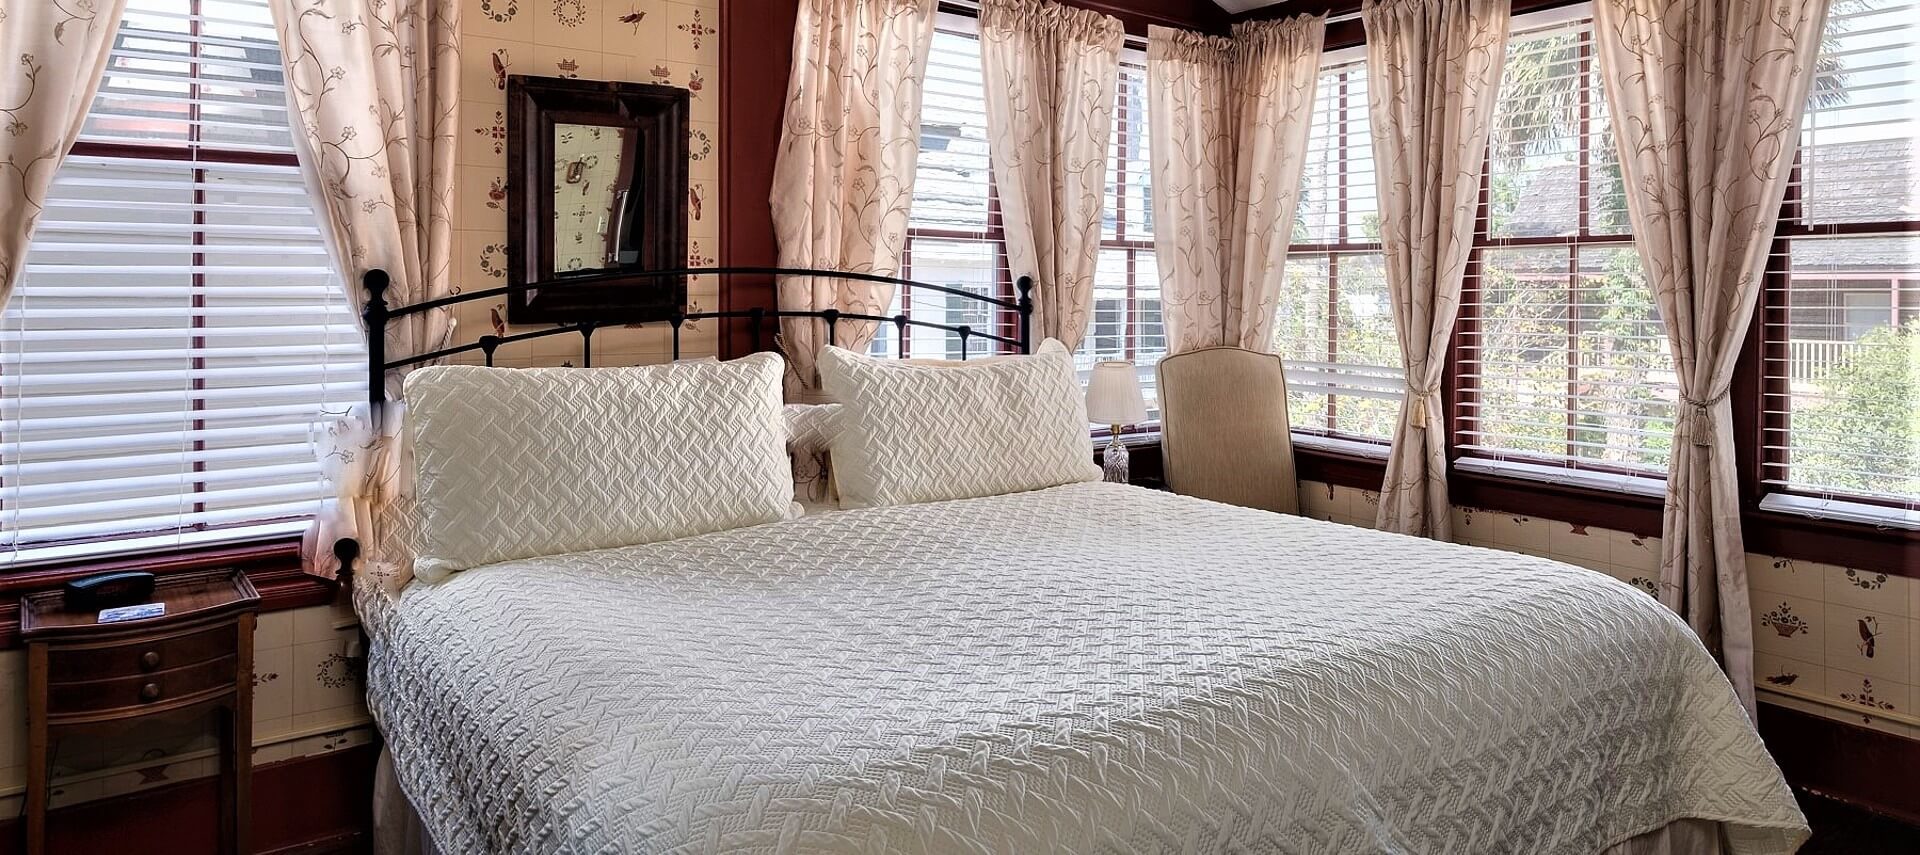 Cozy guestroom with several large windows, bed with cream linens, and wooden side table